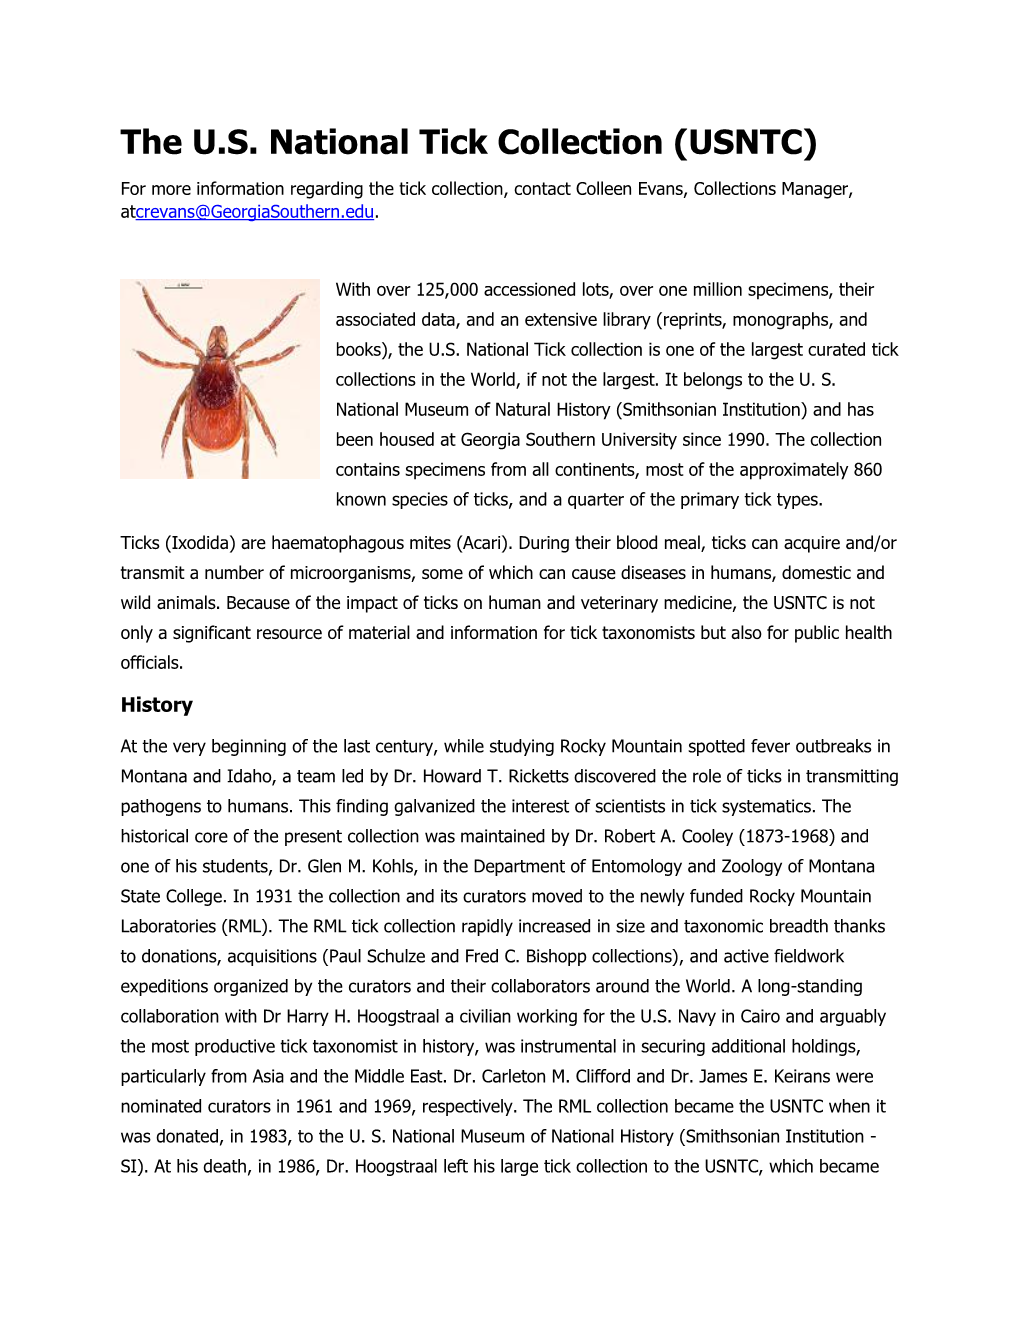 The US National Tick Collection (USNTC)